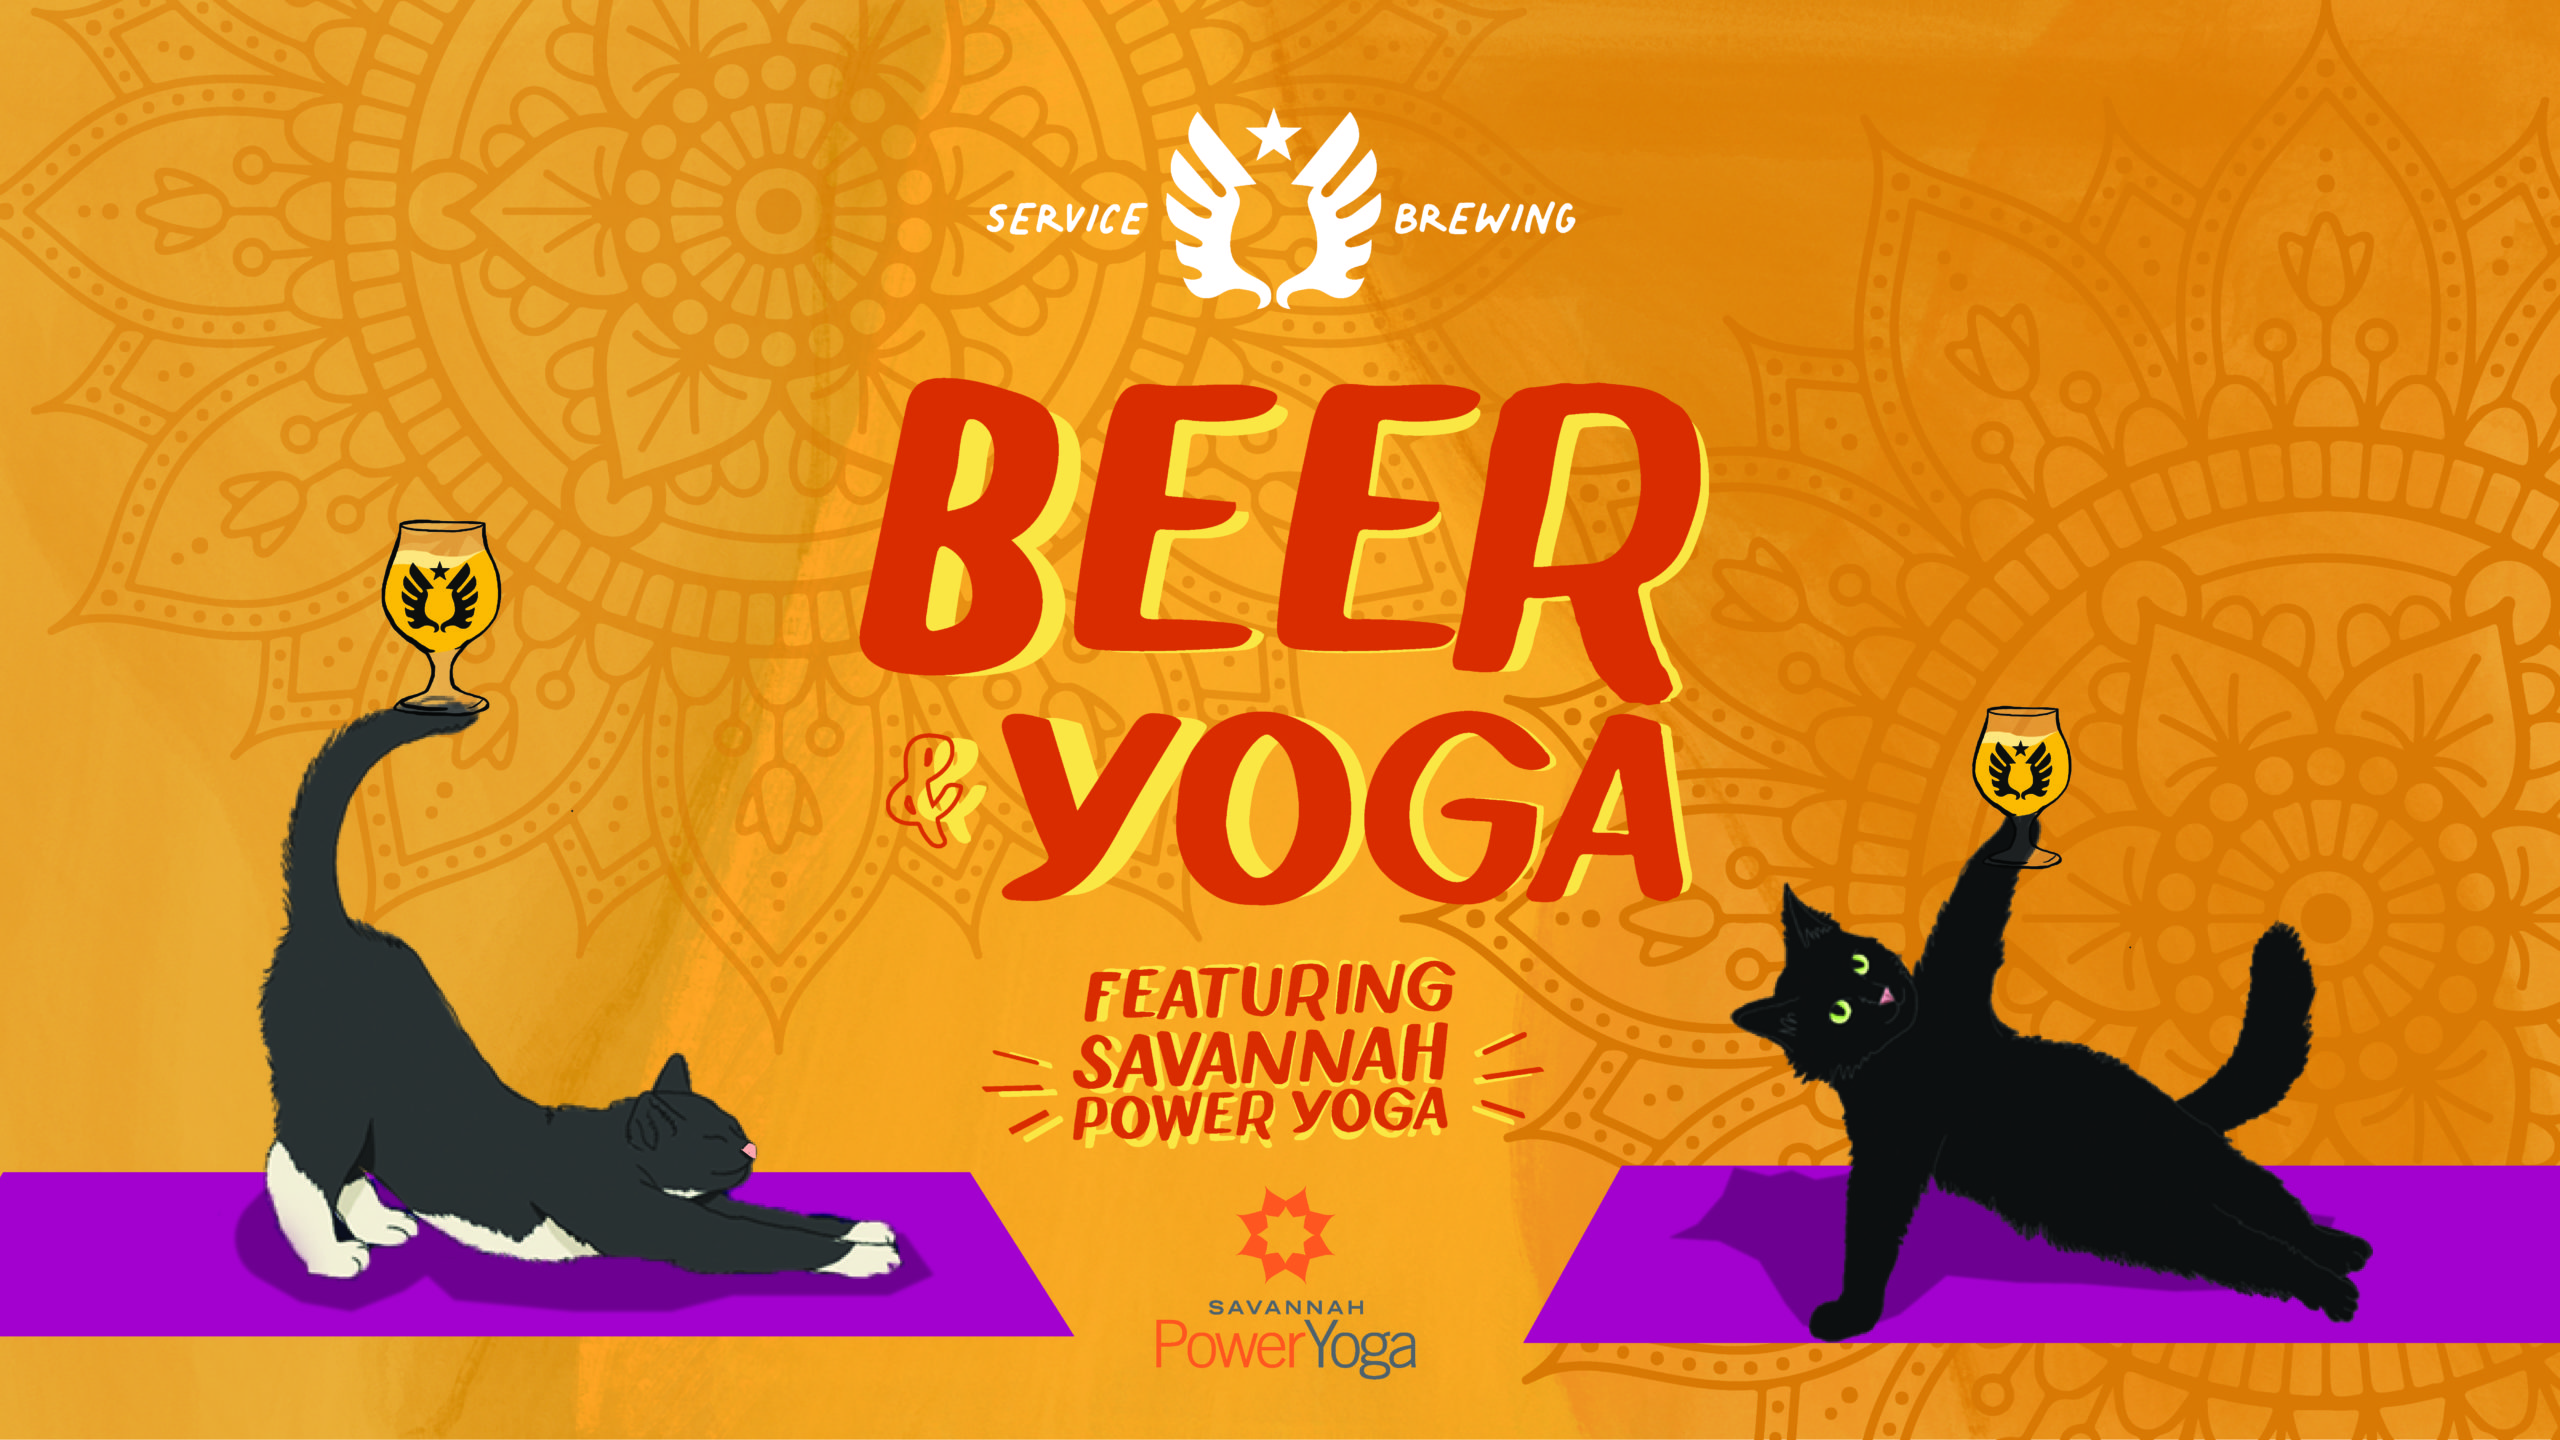 SPECIAL DATE:  Service Brewing Beer & Yoga with Savannah Power Yoga